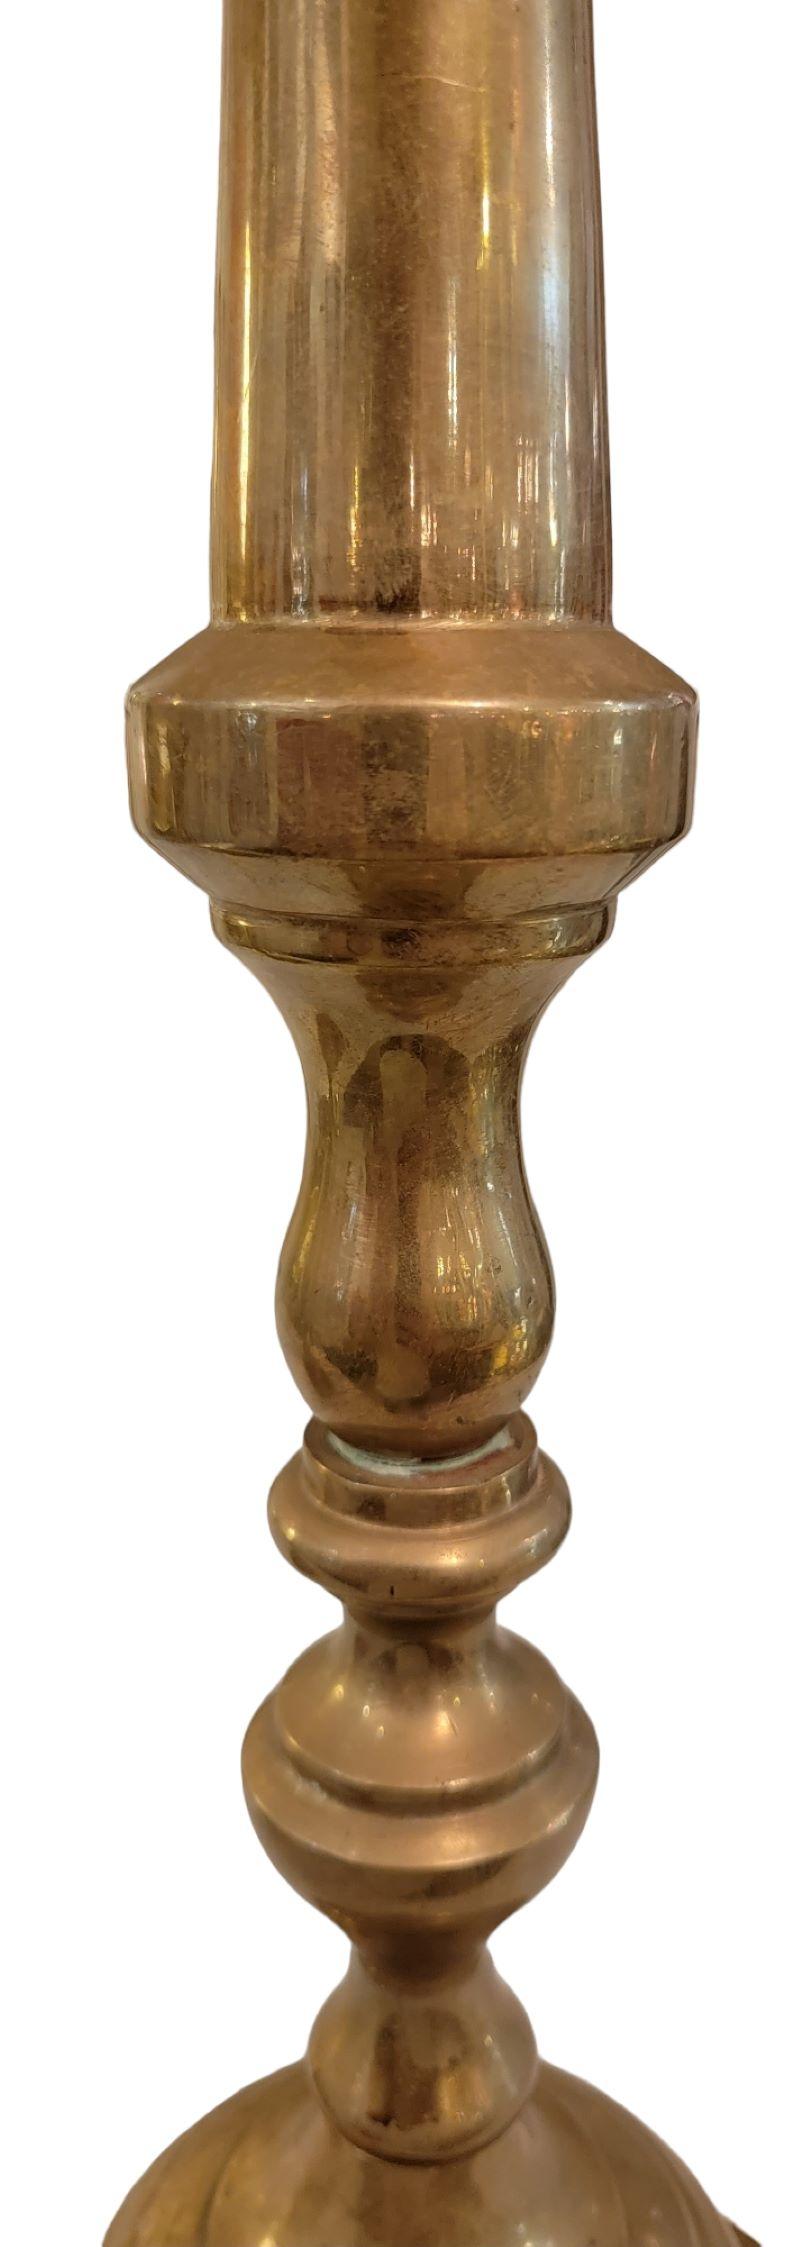 19th Century Large English Solid Brass Candle Sticks For Sale 6